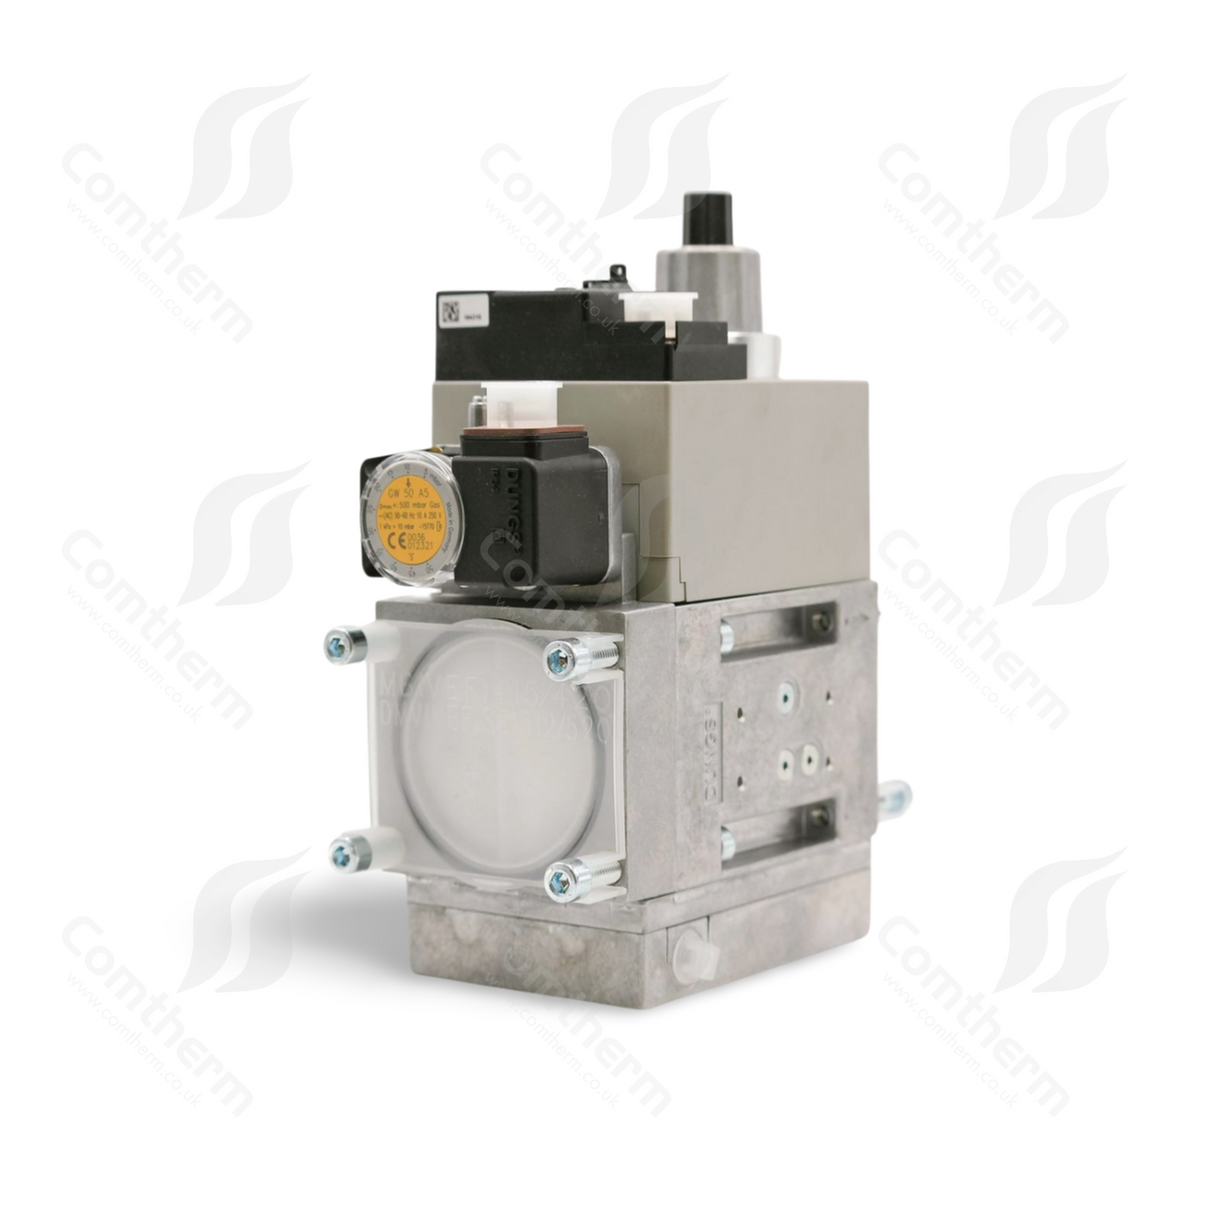 Dungs MB-DLE 415 B01 S20 Multibloc Gas Valve - 230v